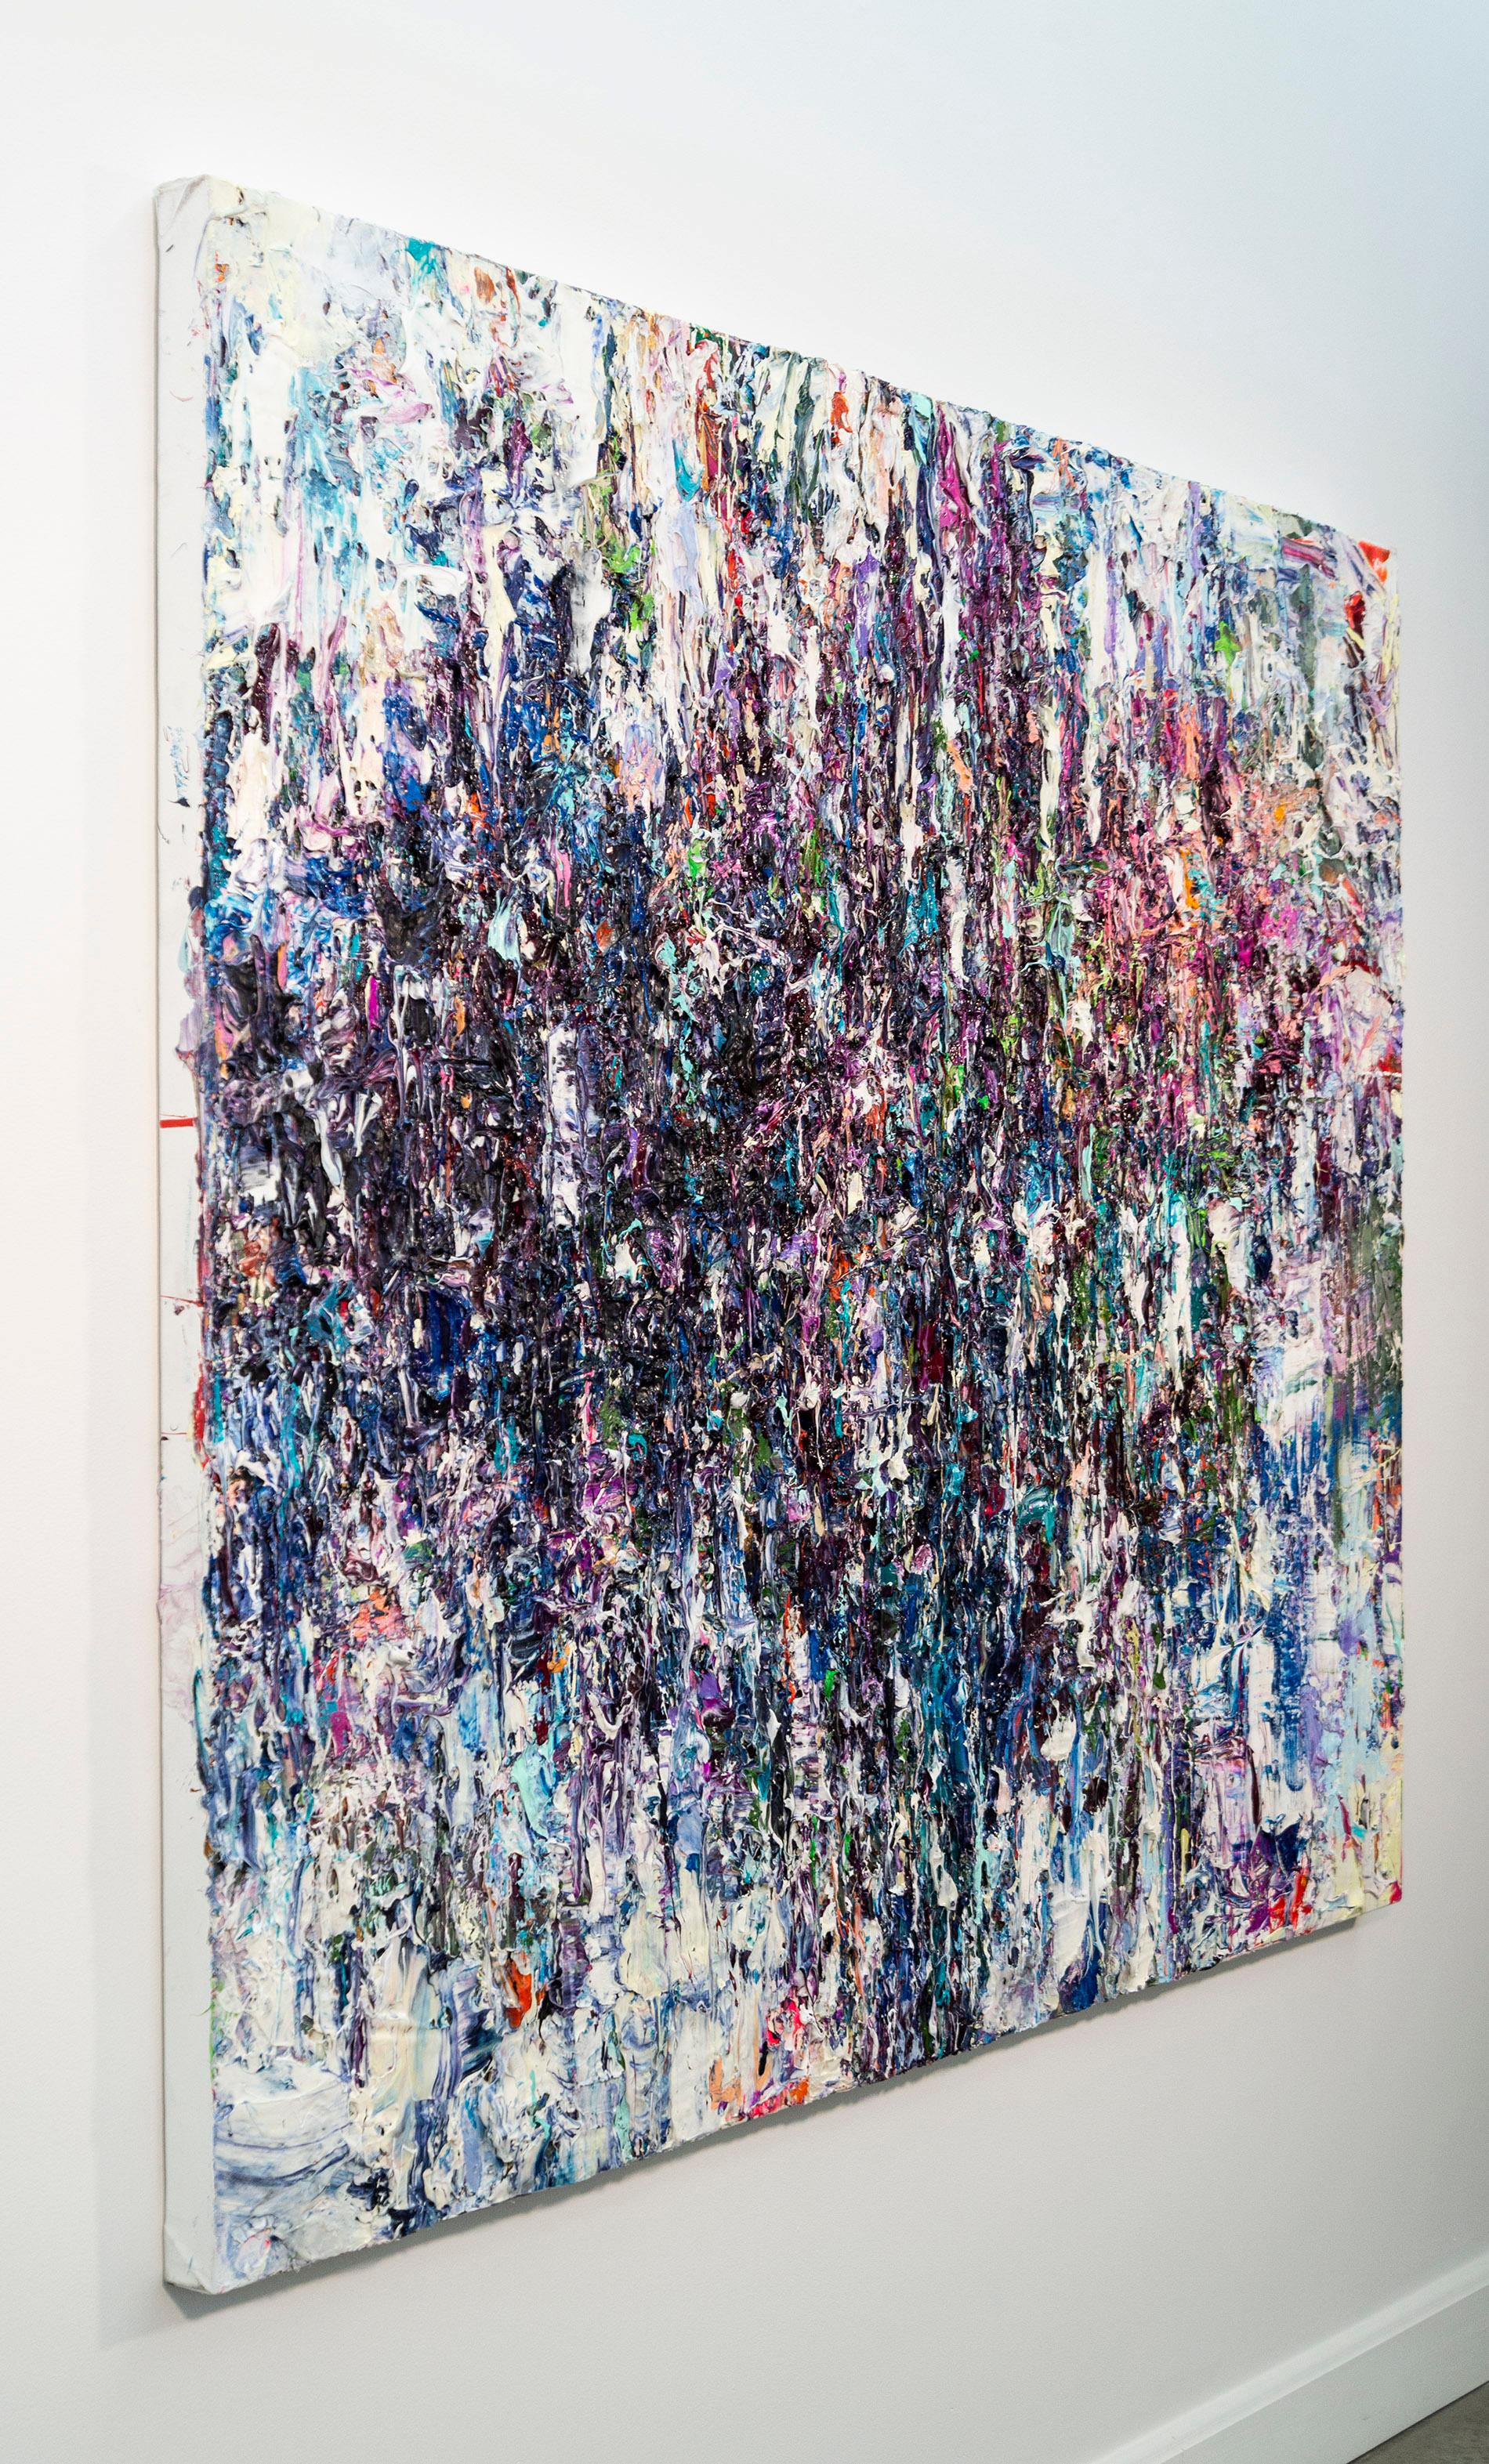  Powder Festival - colorful, impasto, abstract expressionist, acrylic on canvas - Contemporary Painting by Adam Cohen